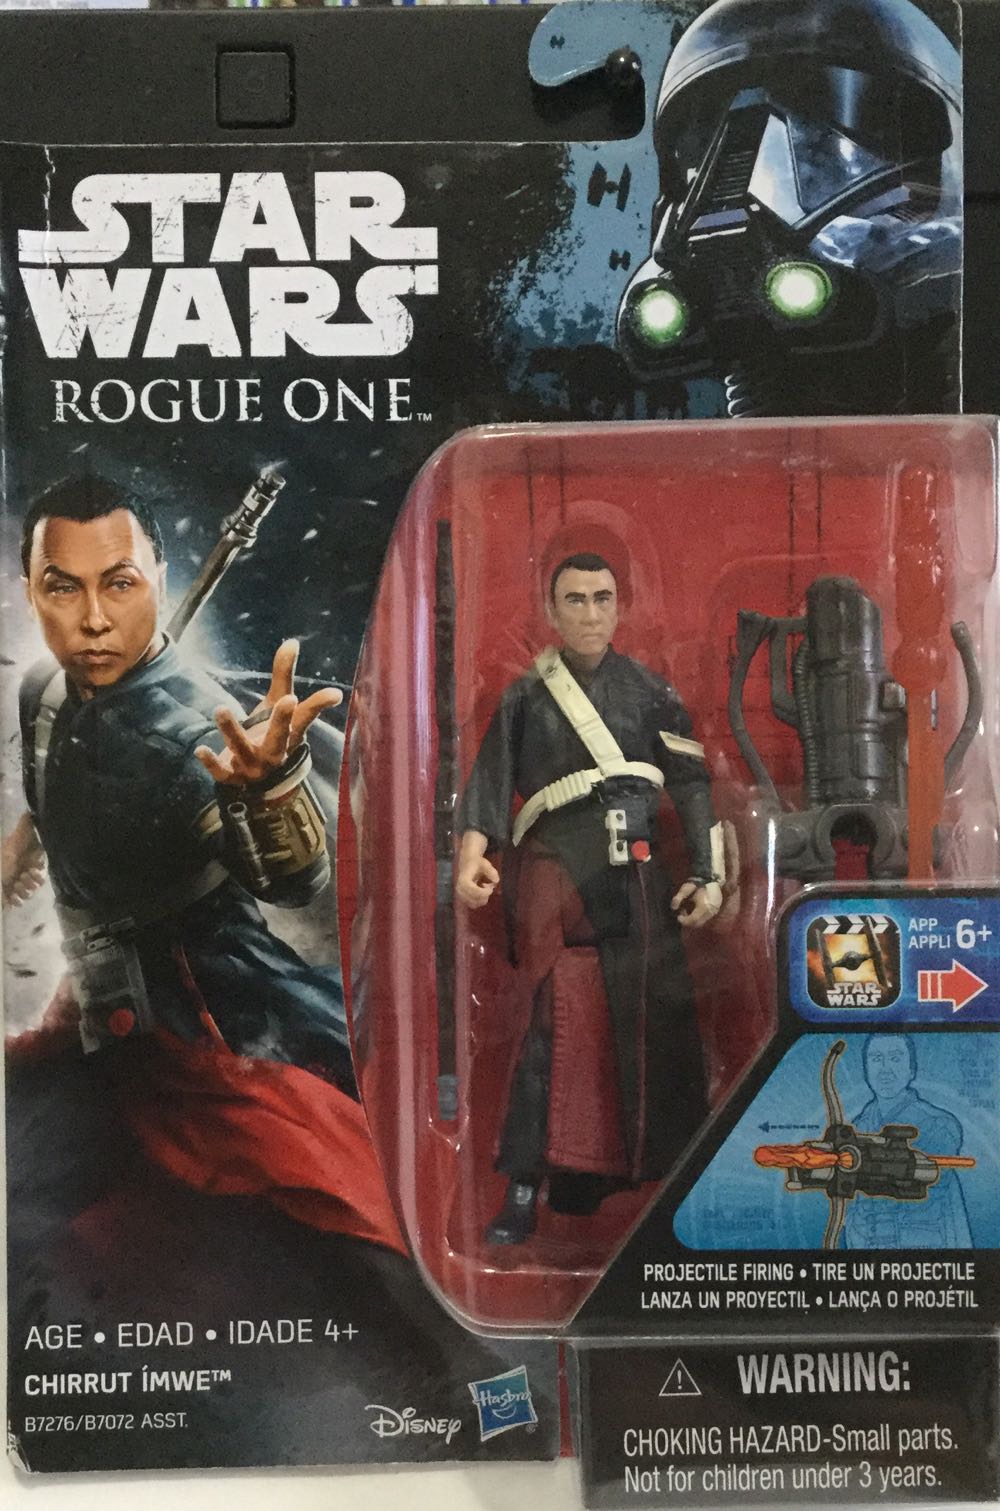 Rogue One Collection - Chirrut Imwe - Disney/ Hasbro (Rogue One) action figure collectible - Main Image 1